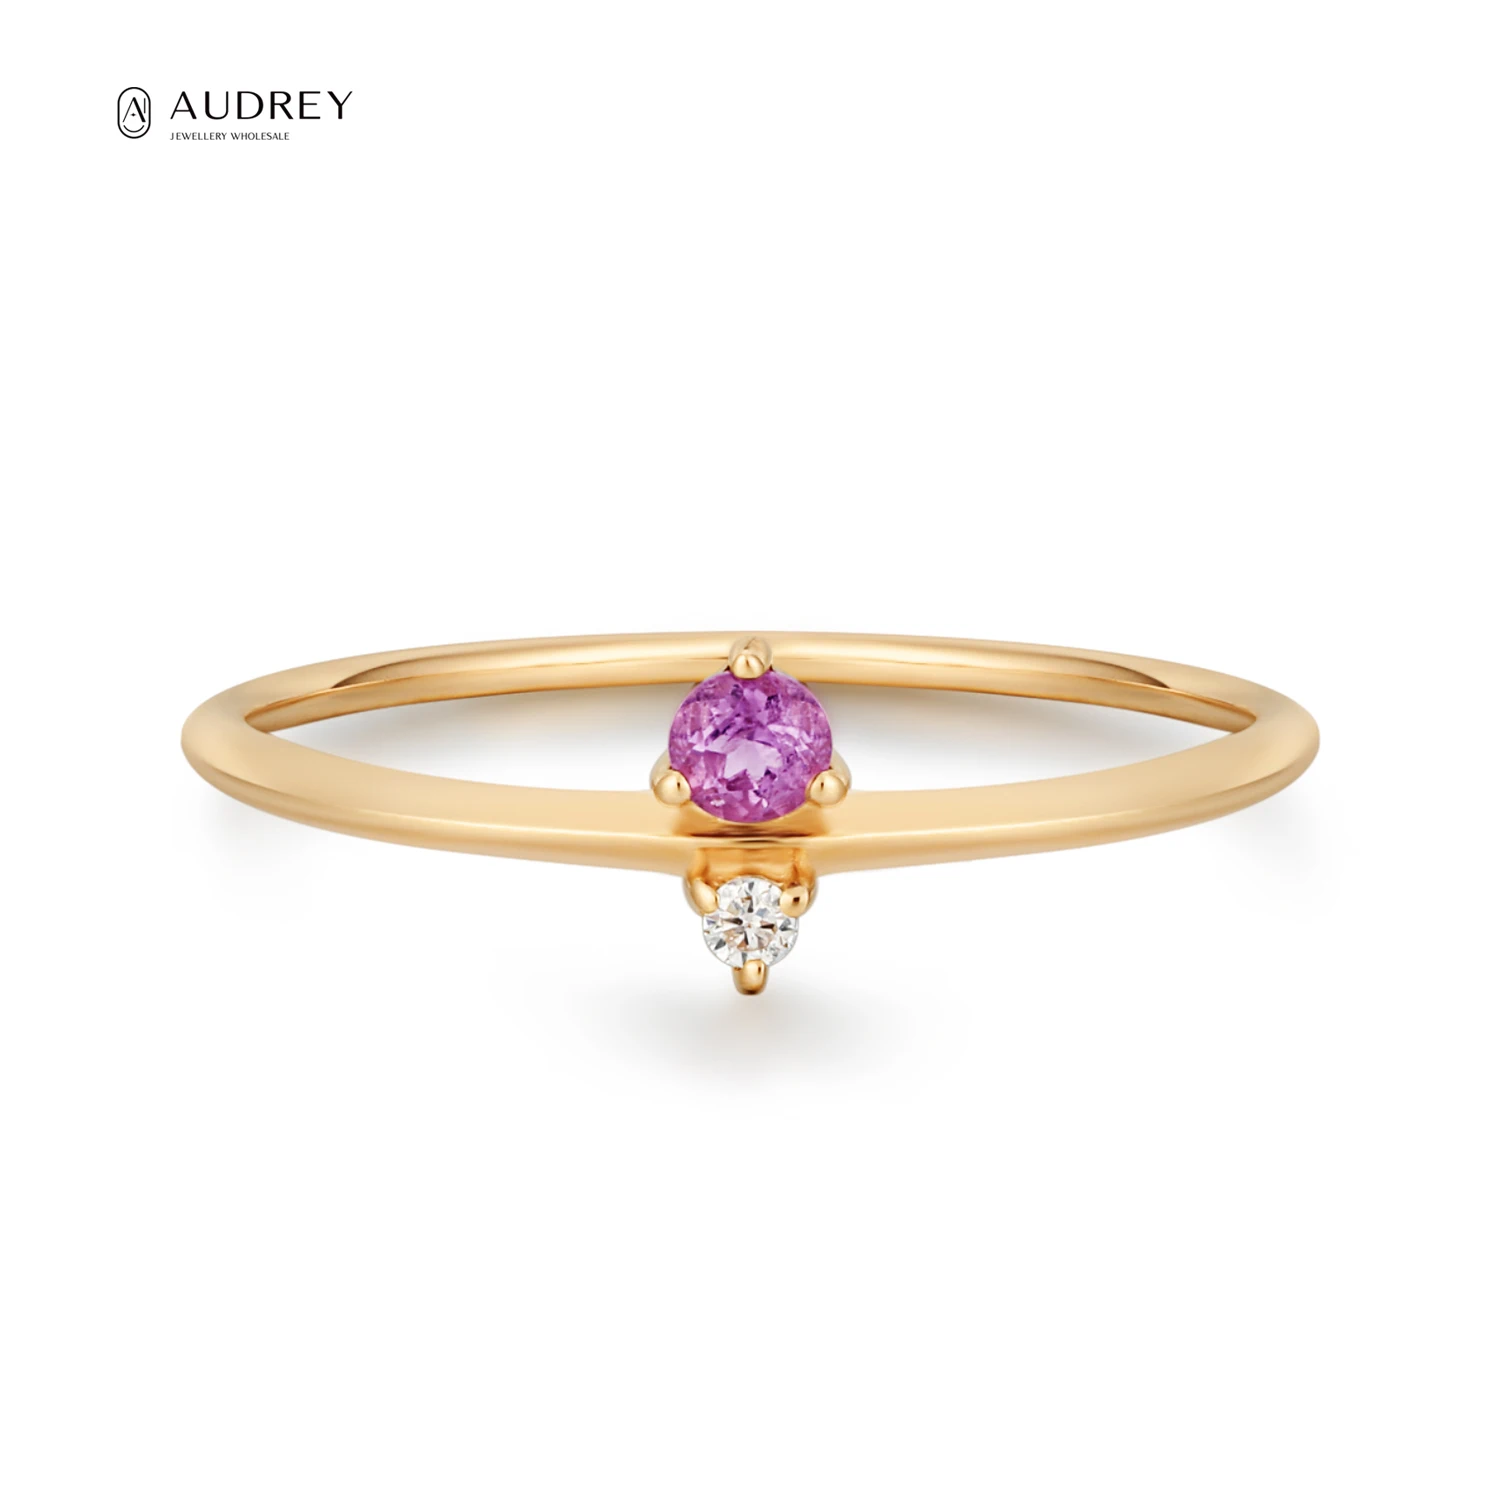 

Audrey Women Engagement Ring Luxury Diamond Jewelry Rings Real 14K Solid Gold Amethyst Ring Gemstone Fine Jewelry